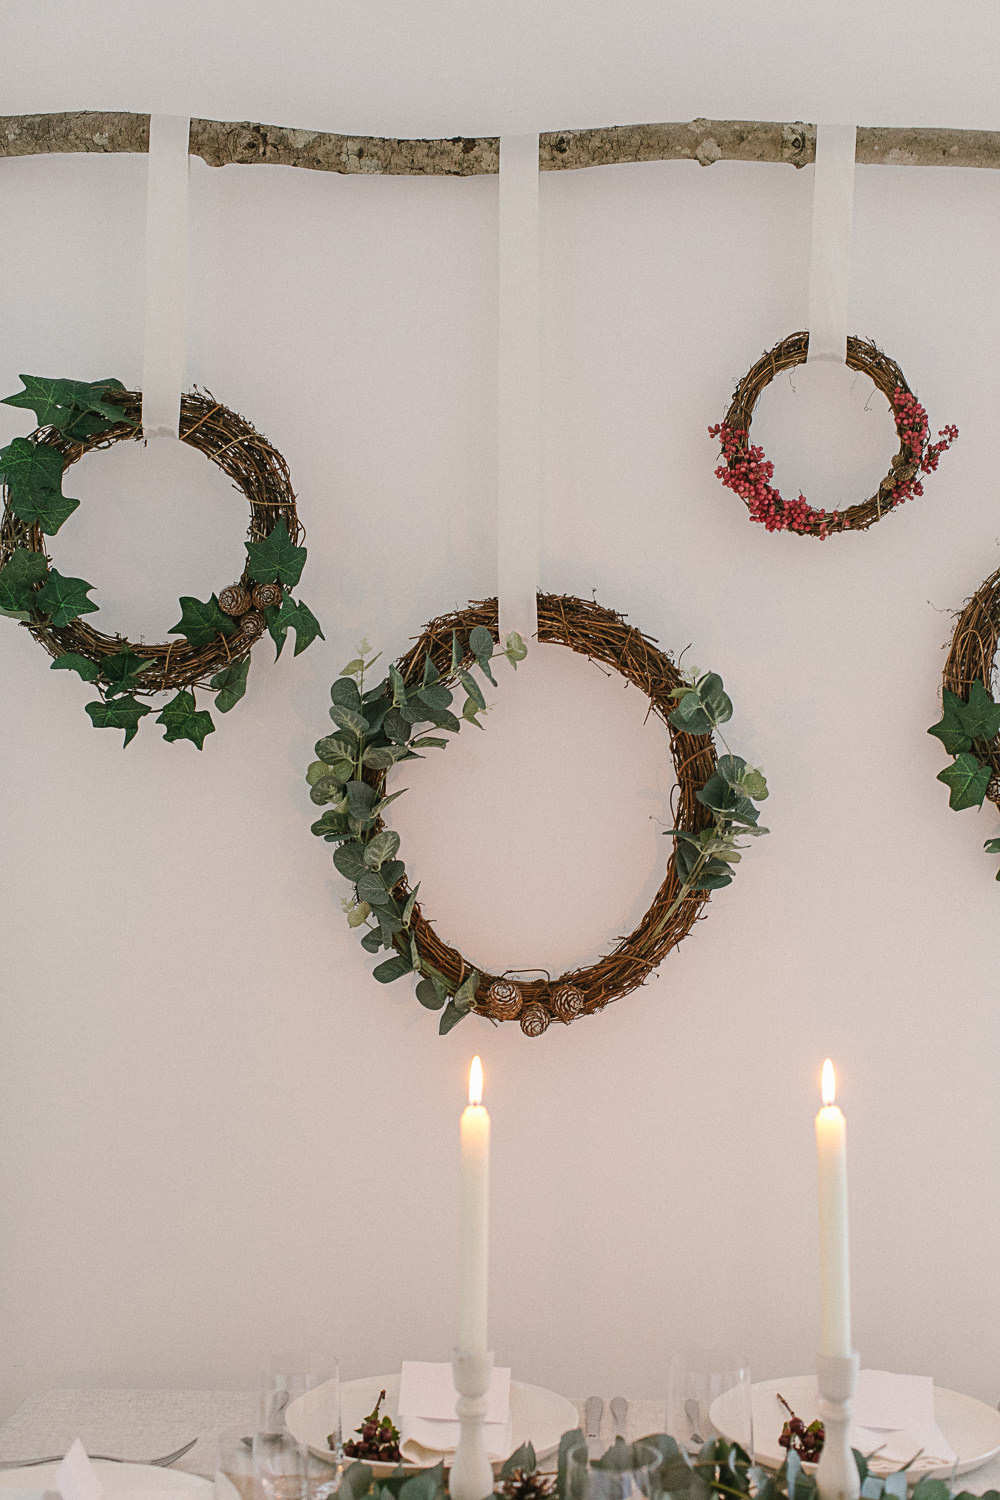 DIY Christmas hanging branch and wreath installation